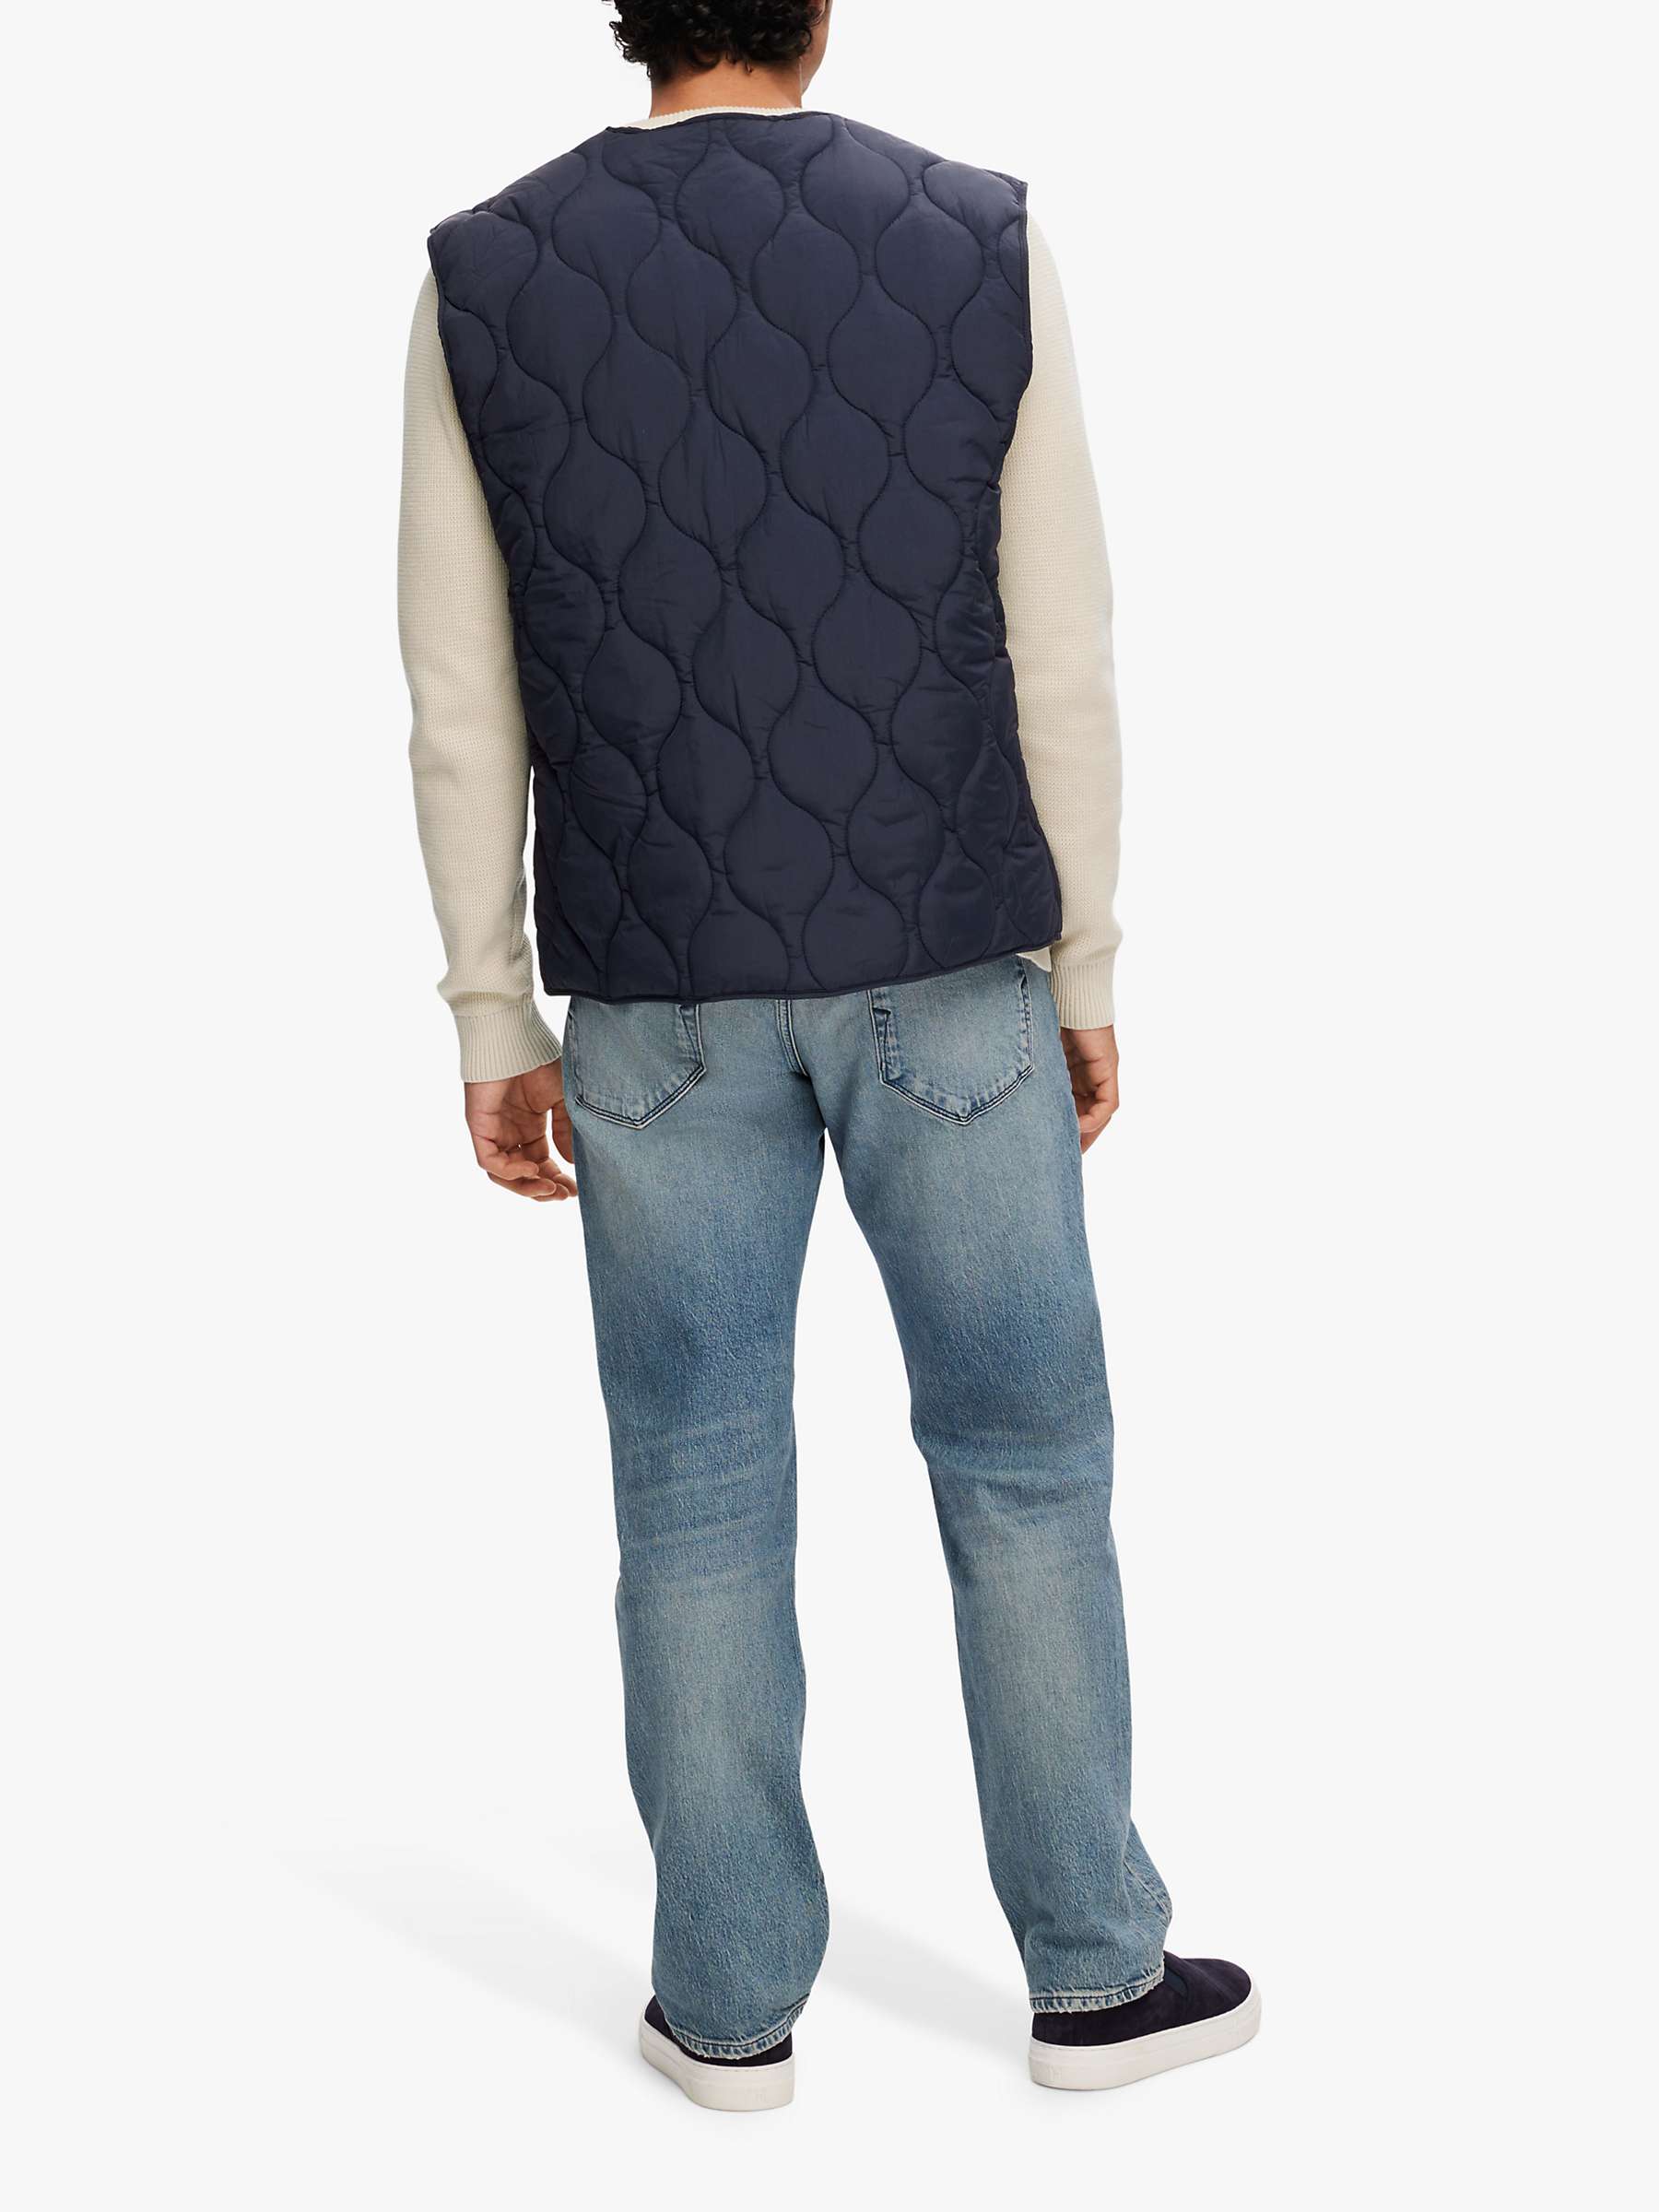 Buy SELECTED HOMME Autumn Essential Gilet Online at johnlewis.com